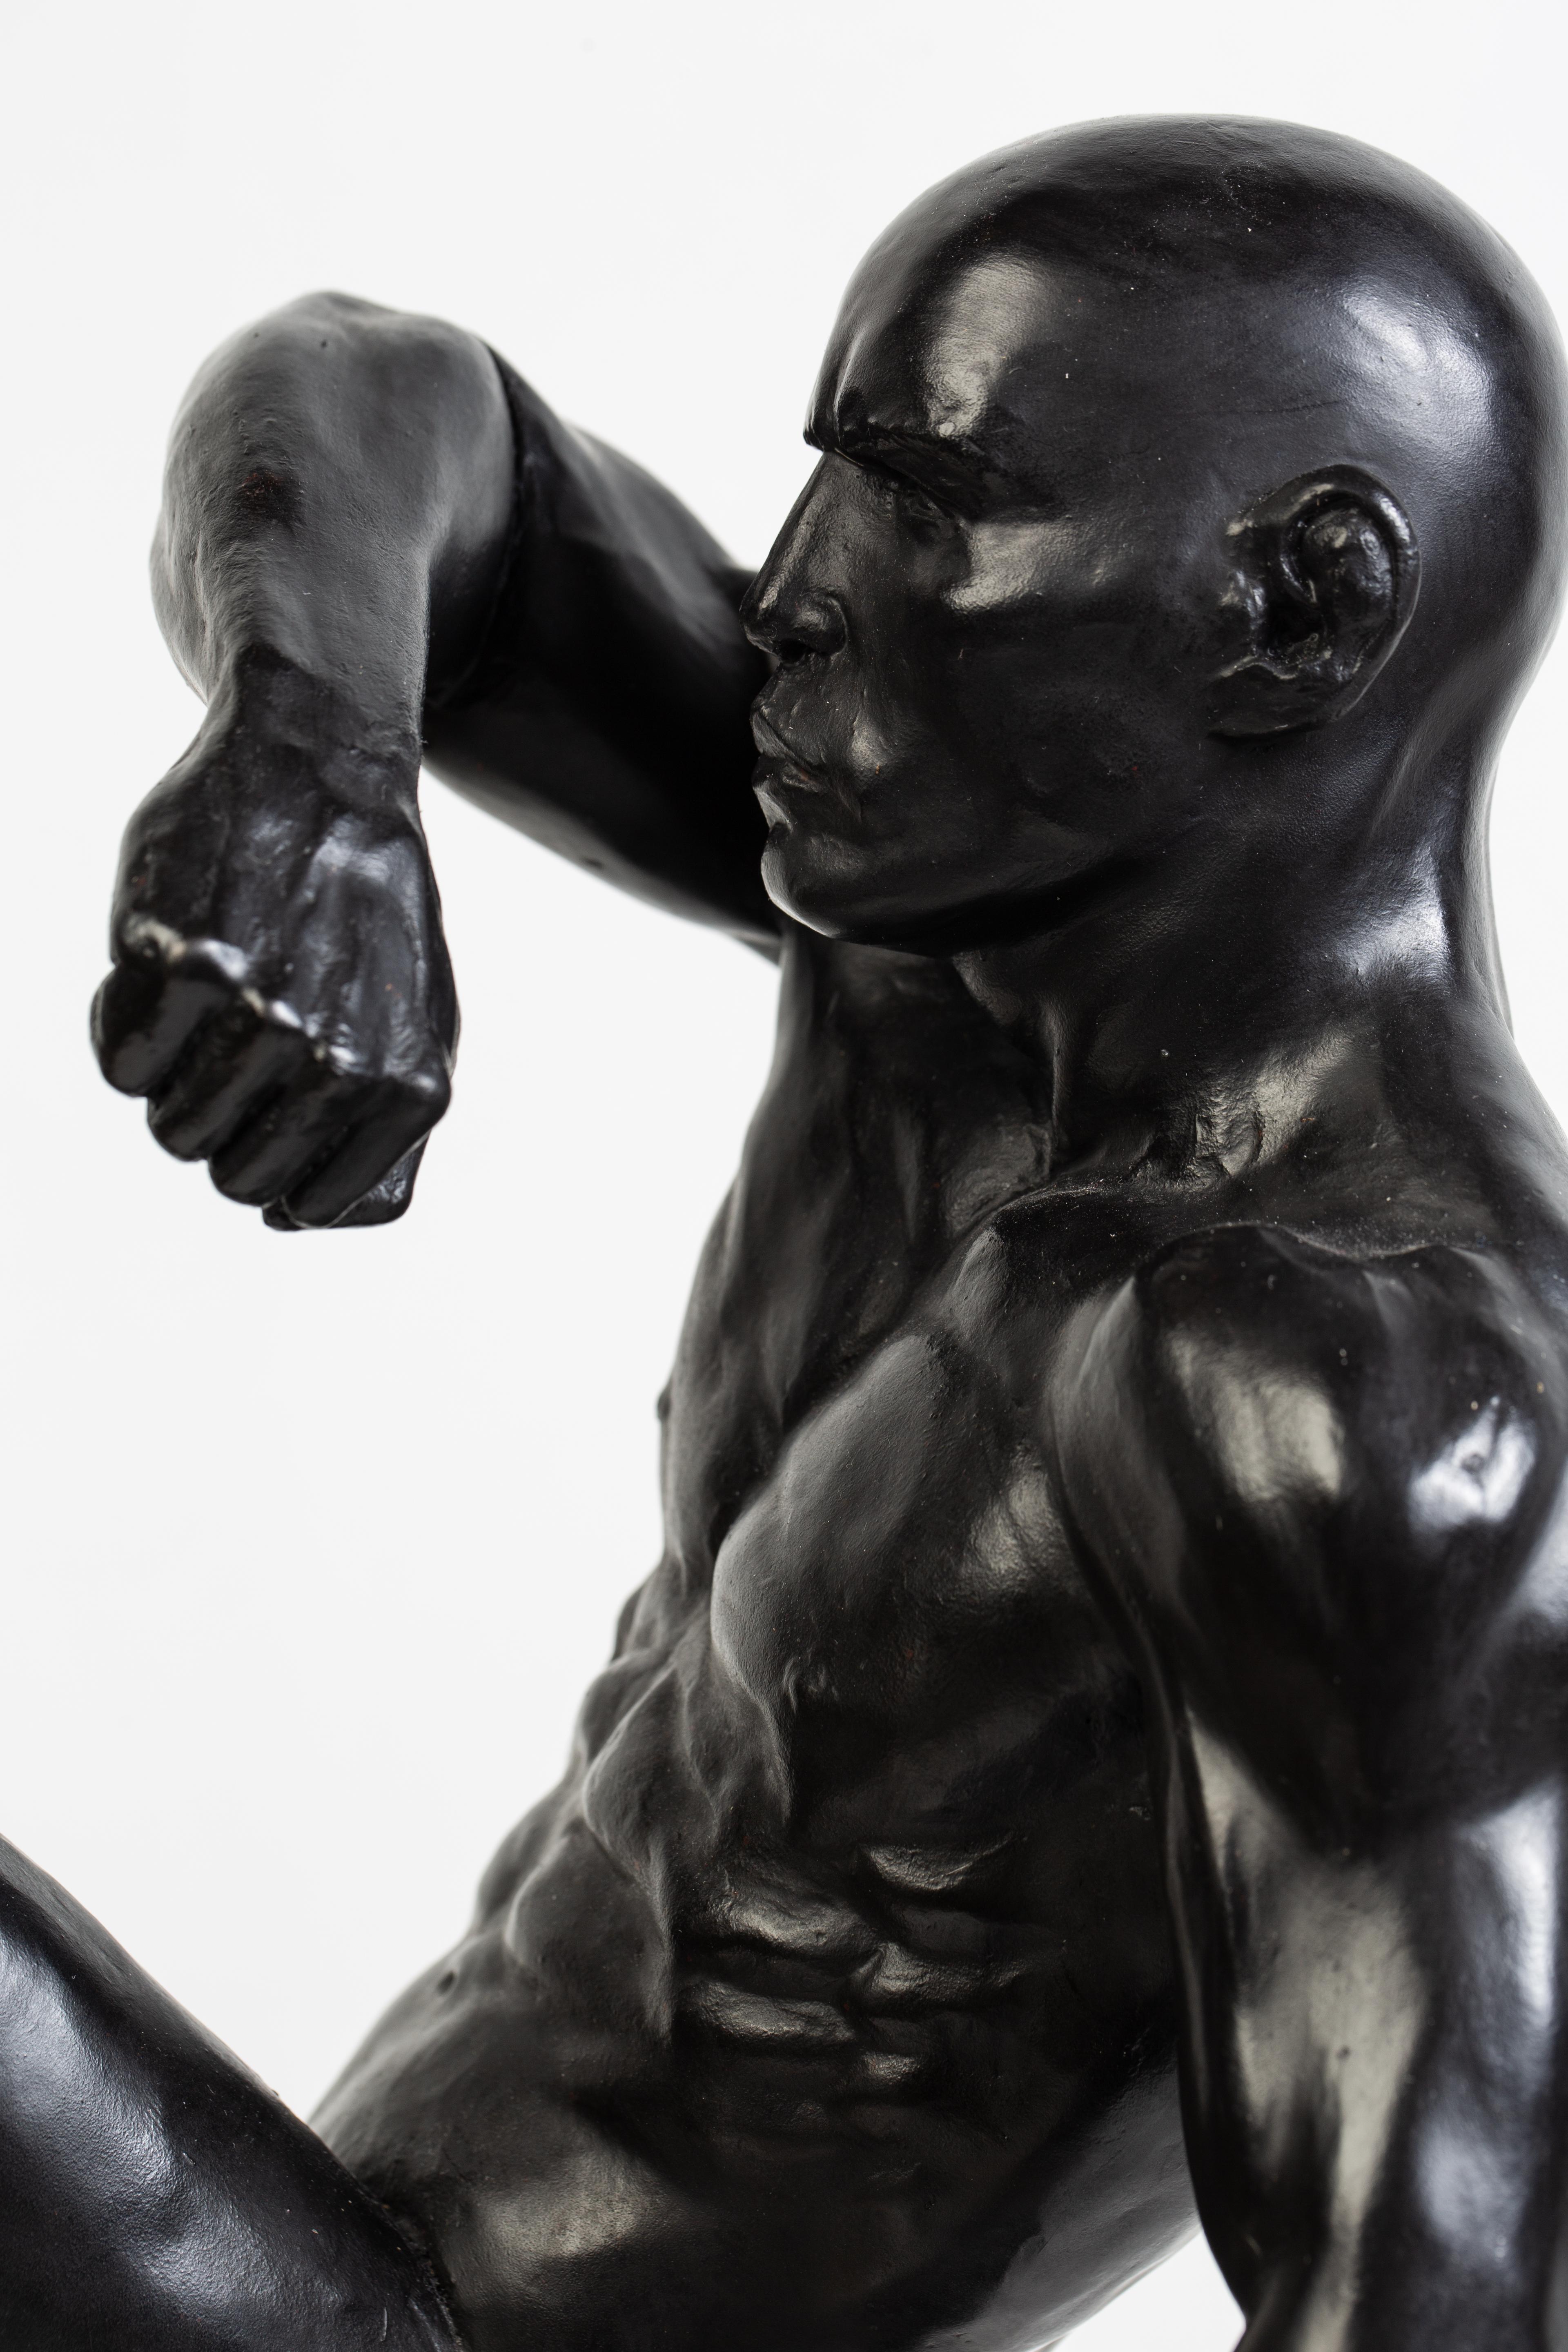 The beauty of the human form is captured is this dynamic bronze sculpture of a Muay Thai Fighter.  

Dean Kugler
This Impact (Muay Thai Fighter)
bronze
18h x 9w x 7d in
45.72h x 22.86w x 17.78d cm

Biography
I became interested in the human form